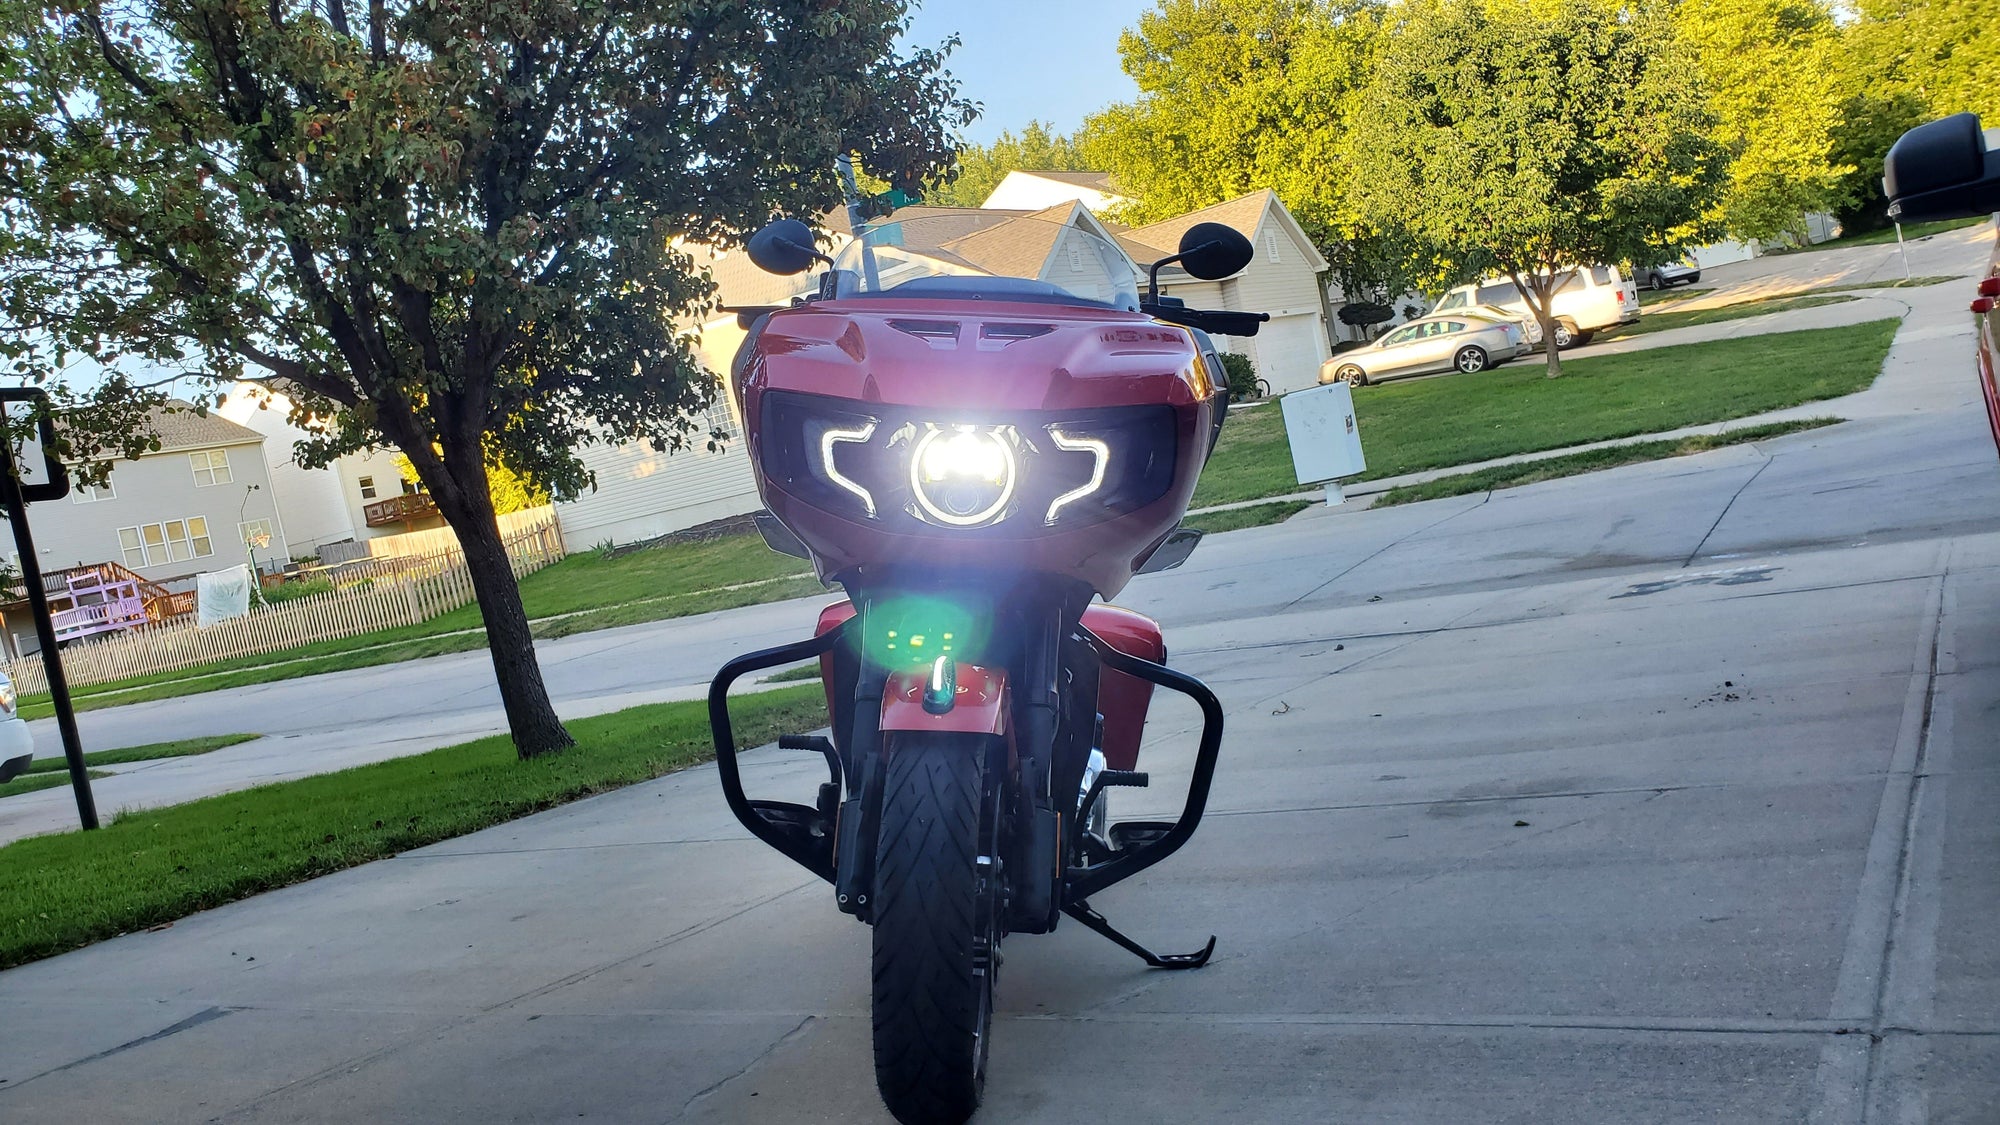 Indian Motorcycle LED Lighting - An Eagle Light Approach